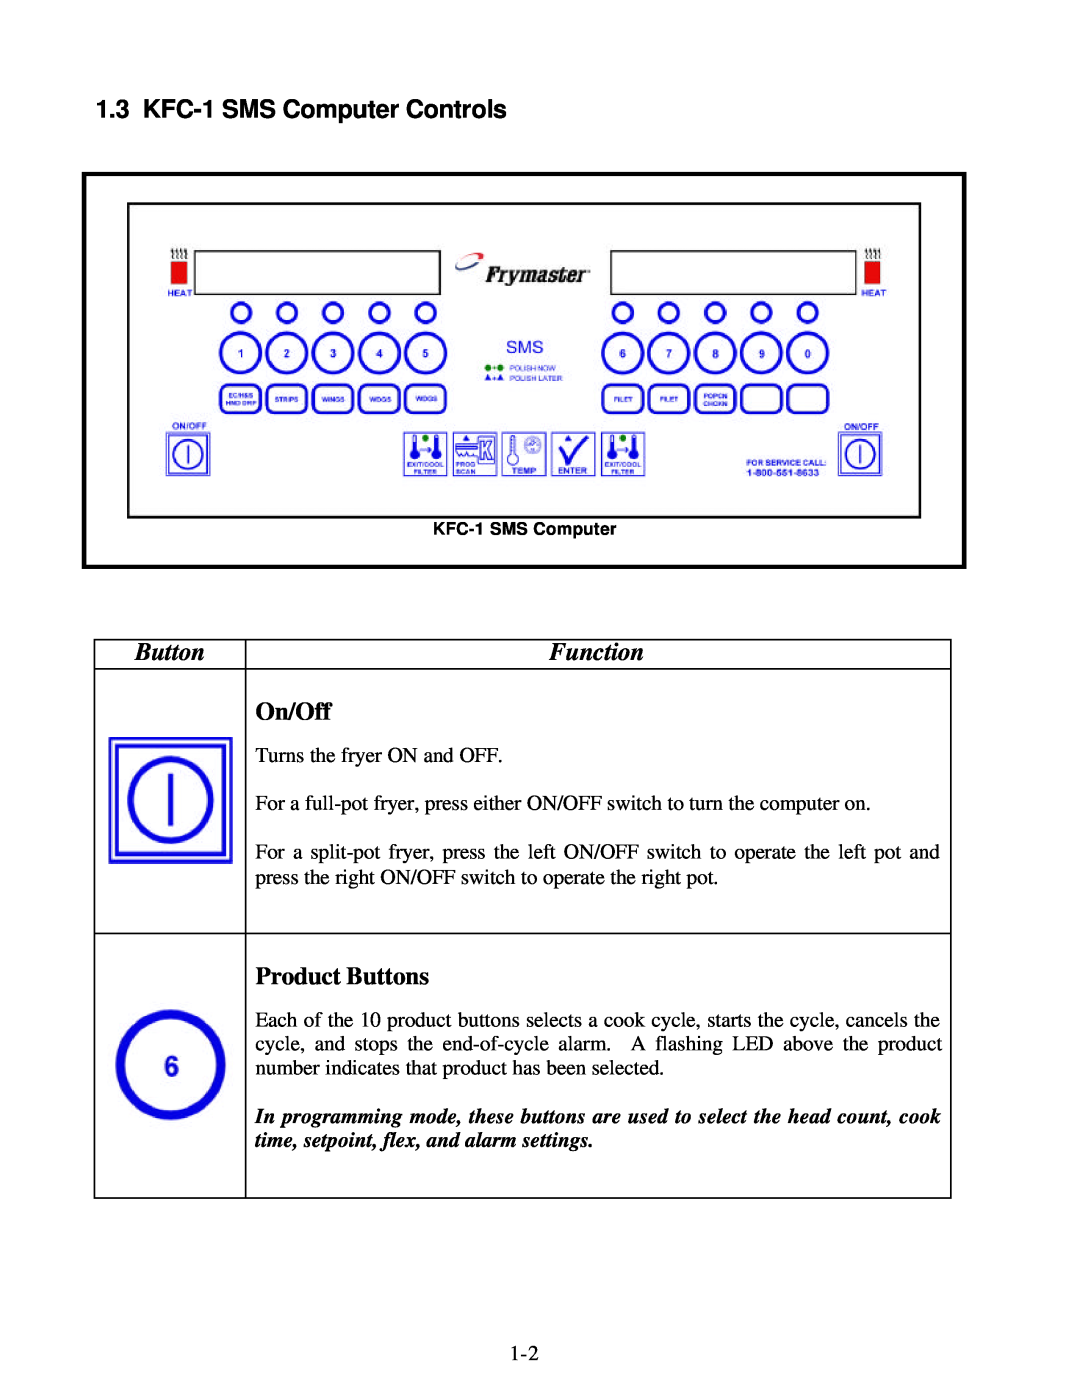 Frymaster KFC-1 SMS manual KFC-1SMS Computer Controls, Function, On/Off, Product Buttons 